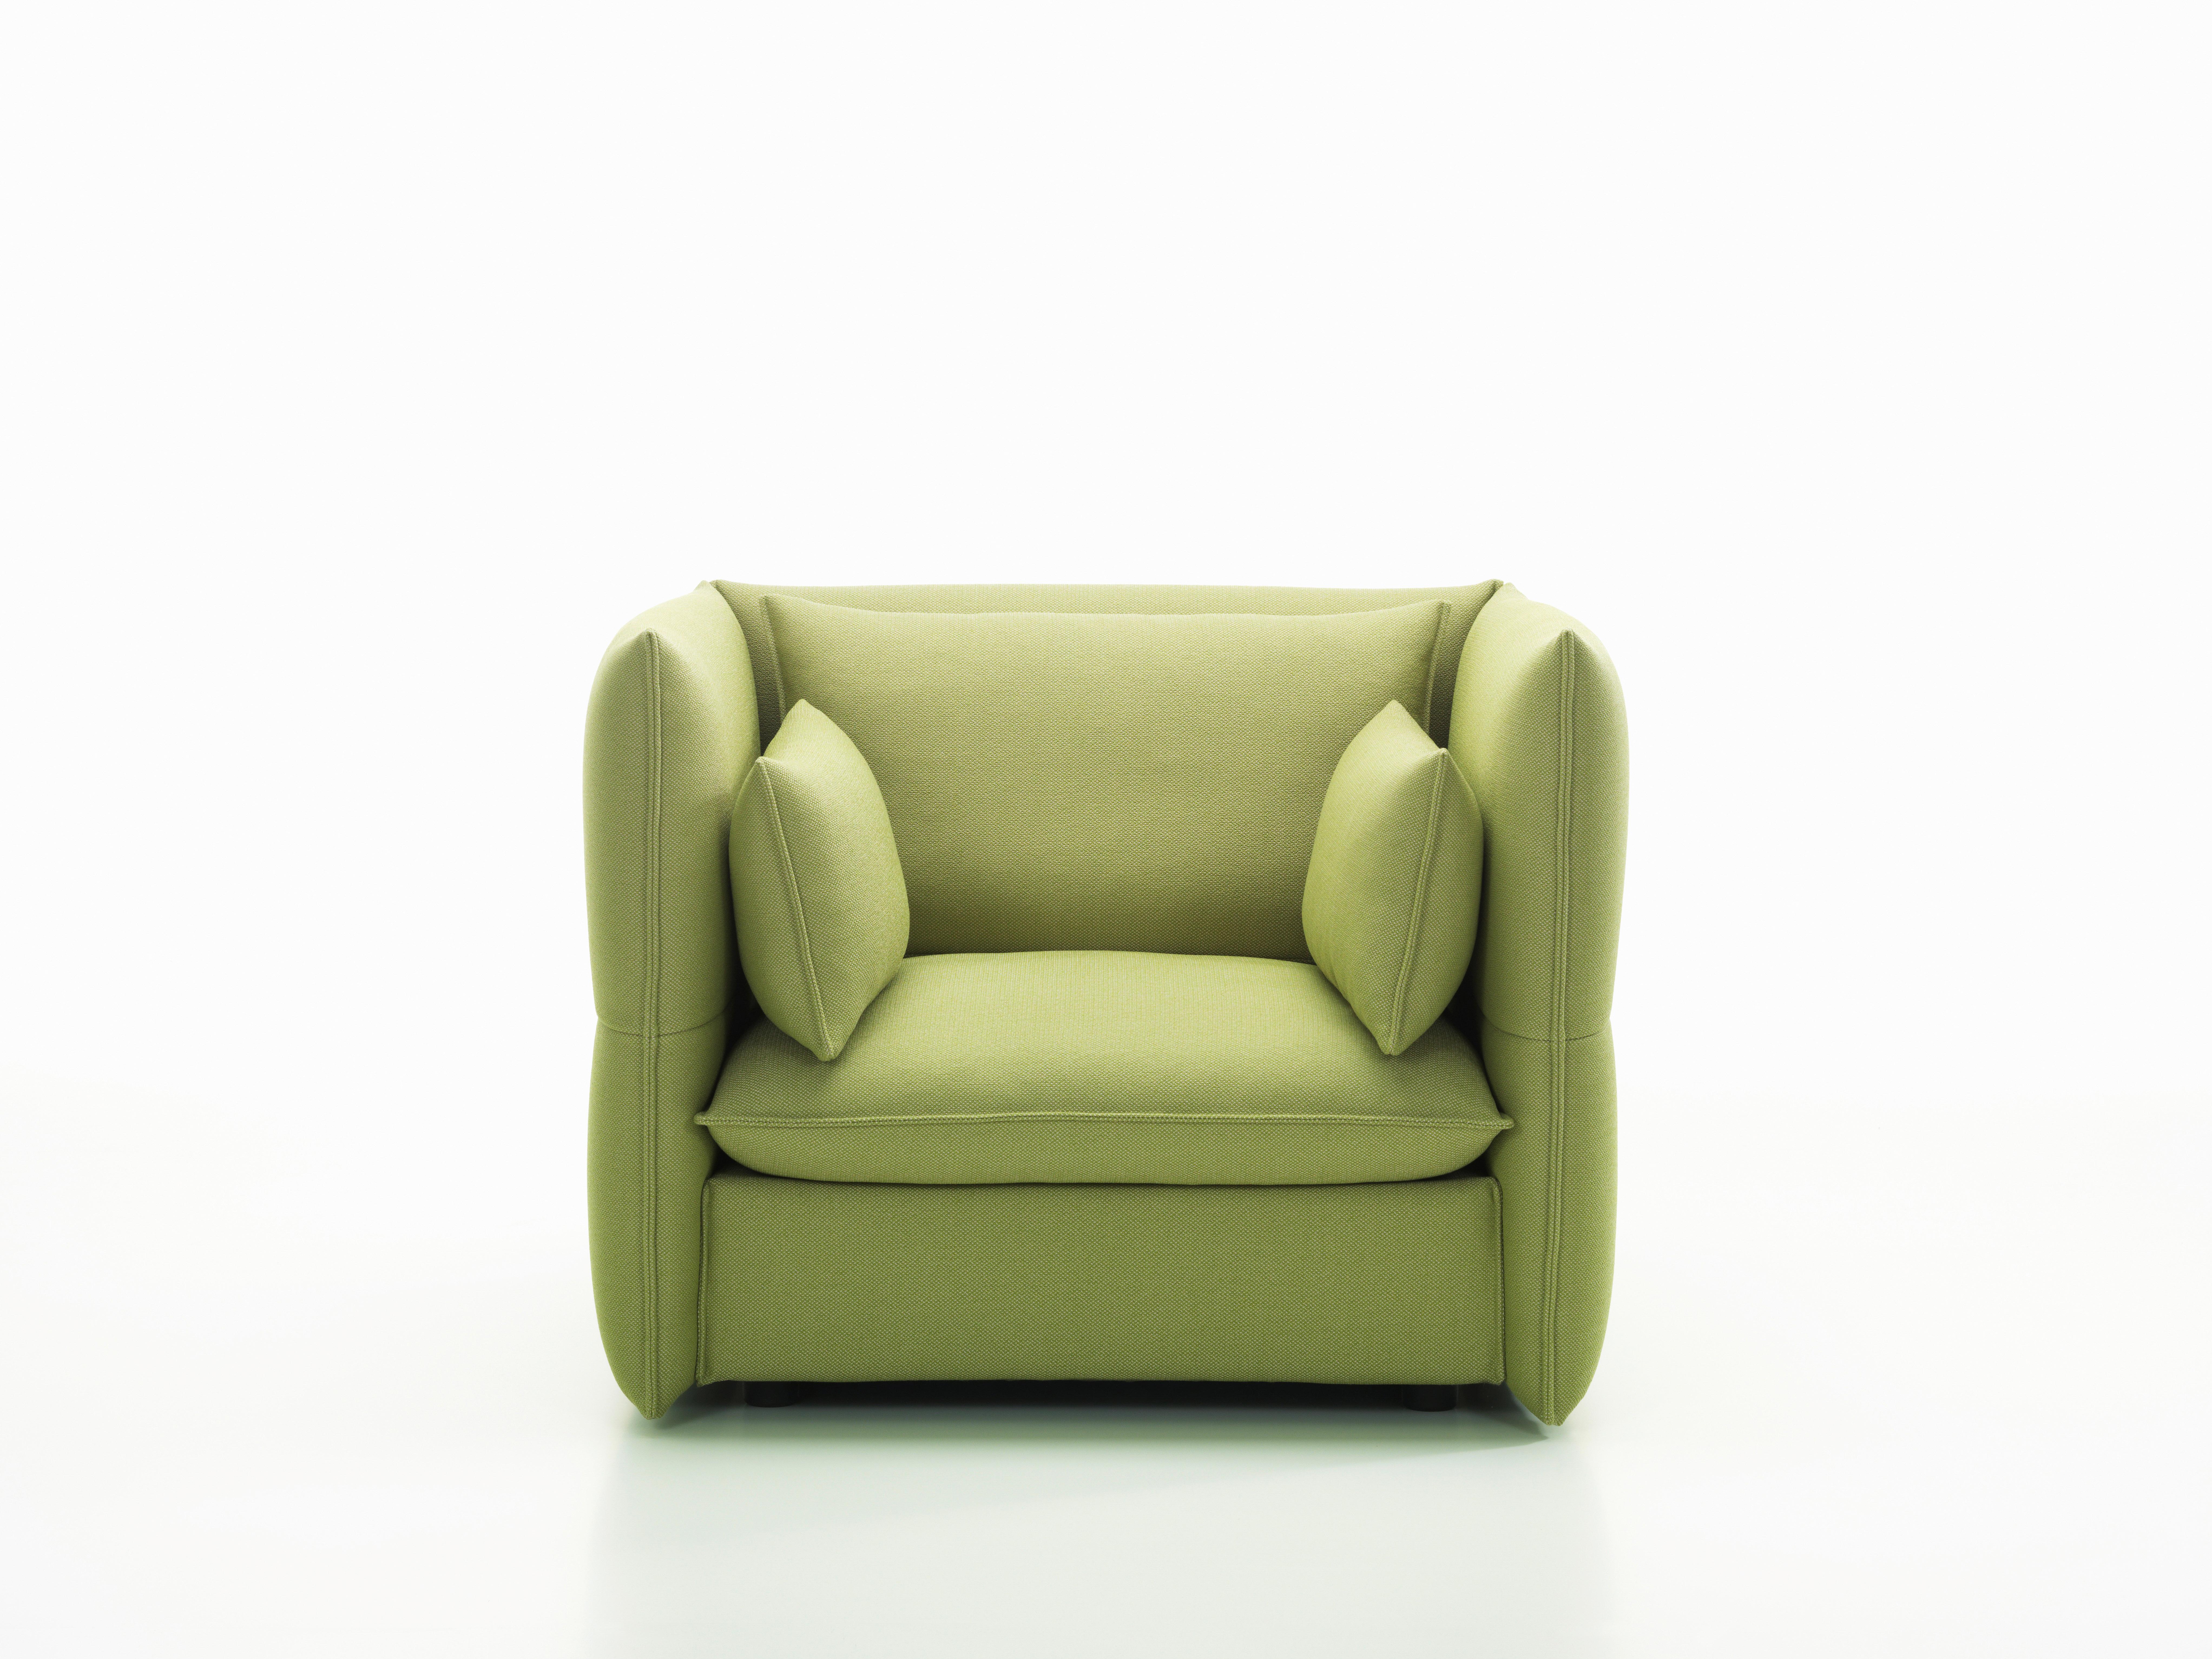 Vitra Mariposa Loveseat in Sand & Avocado Credo by Edward Barber & Jay Osgerby In New Condition For Sale In New York, NY